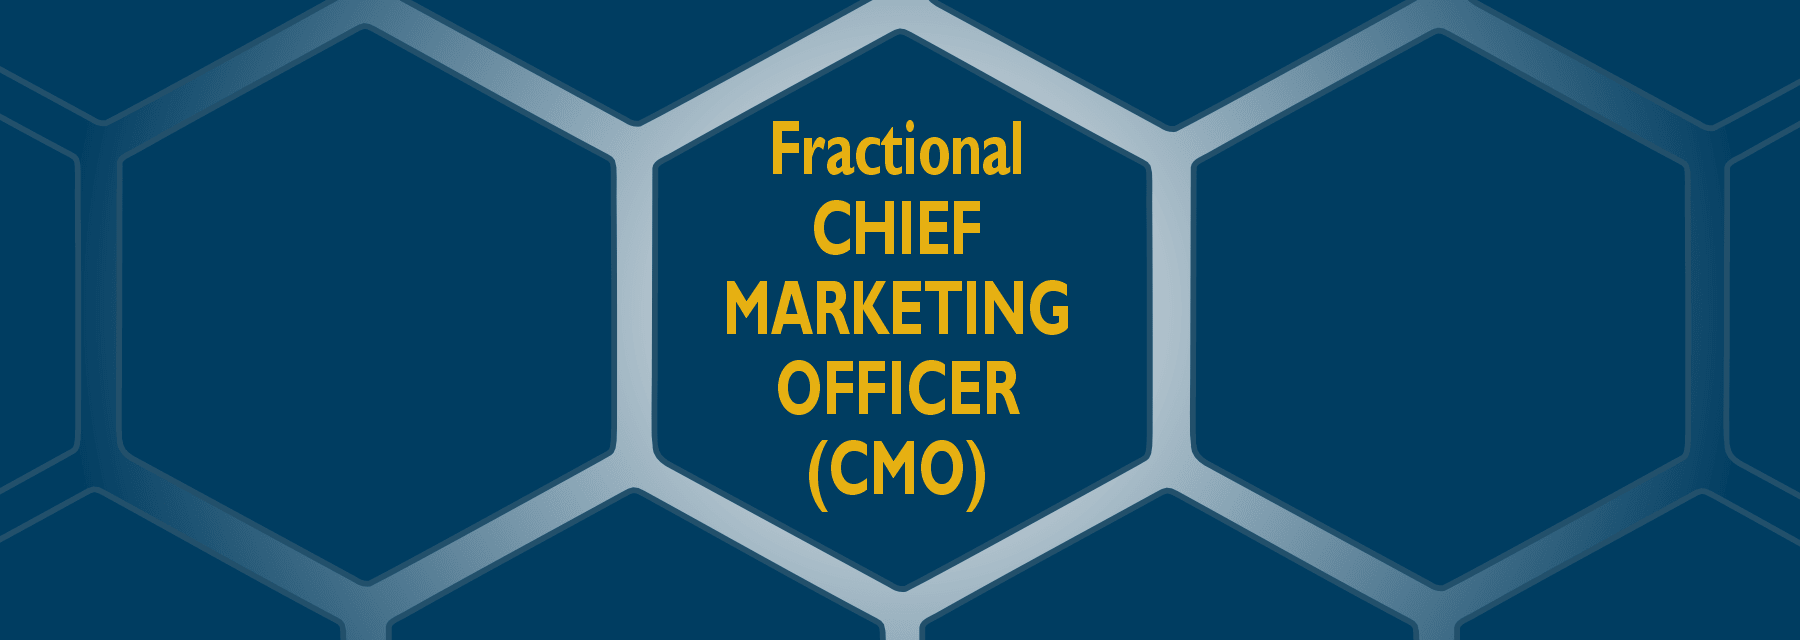 fractional chief marketing officer (CMO) banner